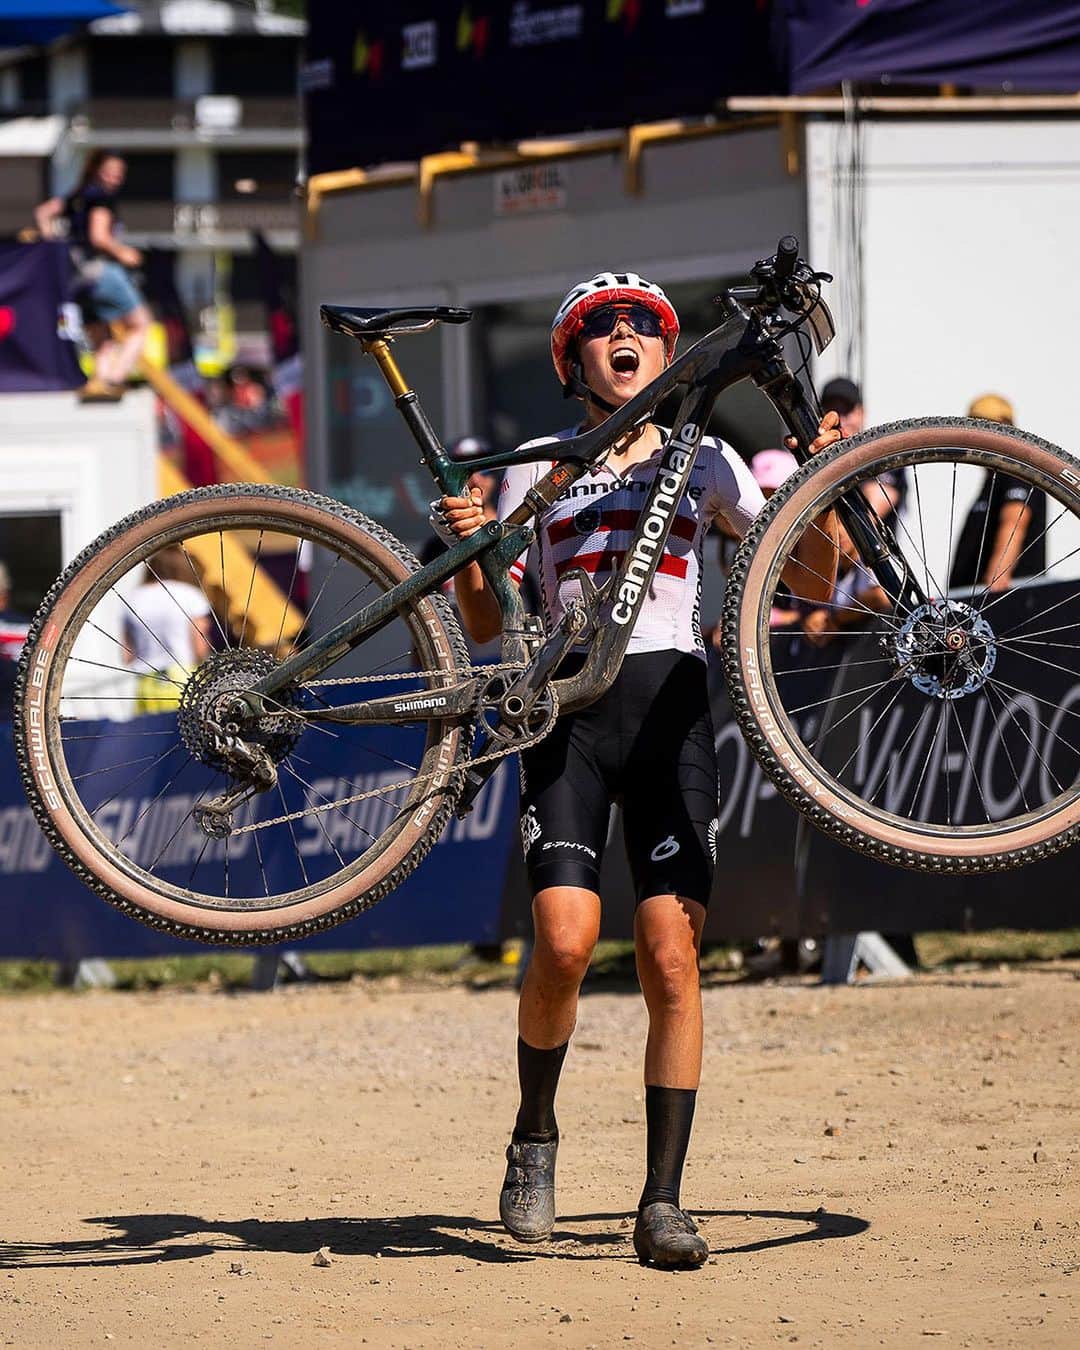 Shimanoのインスタグラム：「The heat got turned up to the max at the @uci_mtbworldseries XCO in Les Gets last weekend! @mona.mitterwallner continued her winning streak with great style, with @puckpieterse earning a close second place. Riding in front of a home crowd, @paulineferrandprevot put in a monumental effort to secure her third position.  A brilliant display of technical prowess and high-class performance, backed up by precision componentry.  #ShimanoMTB #MakeYourMark 📸 @kikeabelleiraphoto」